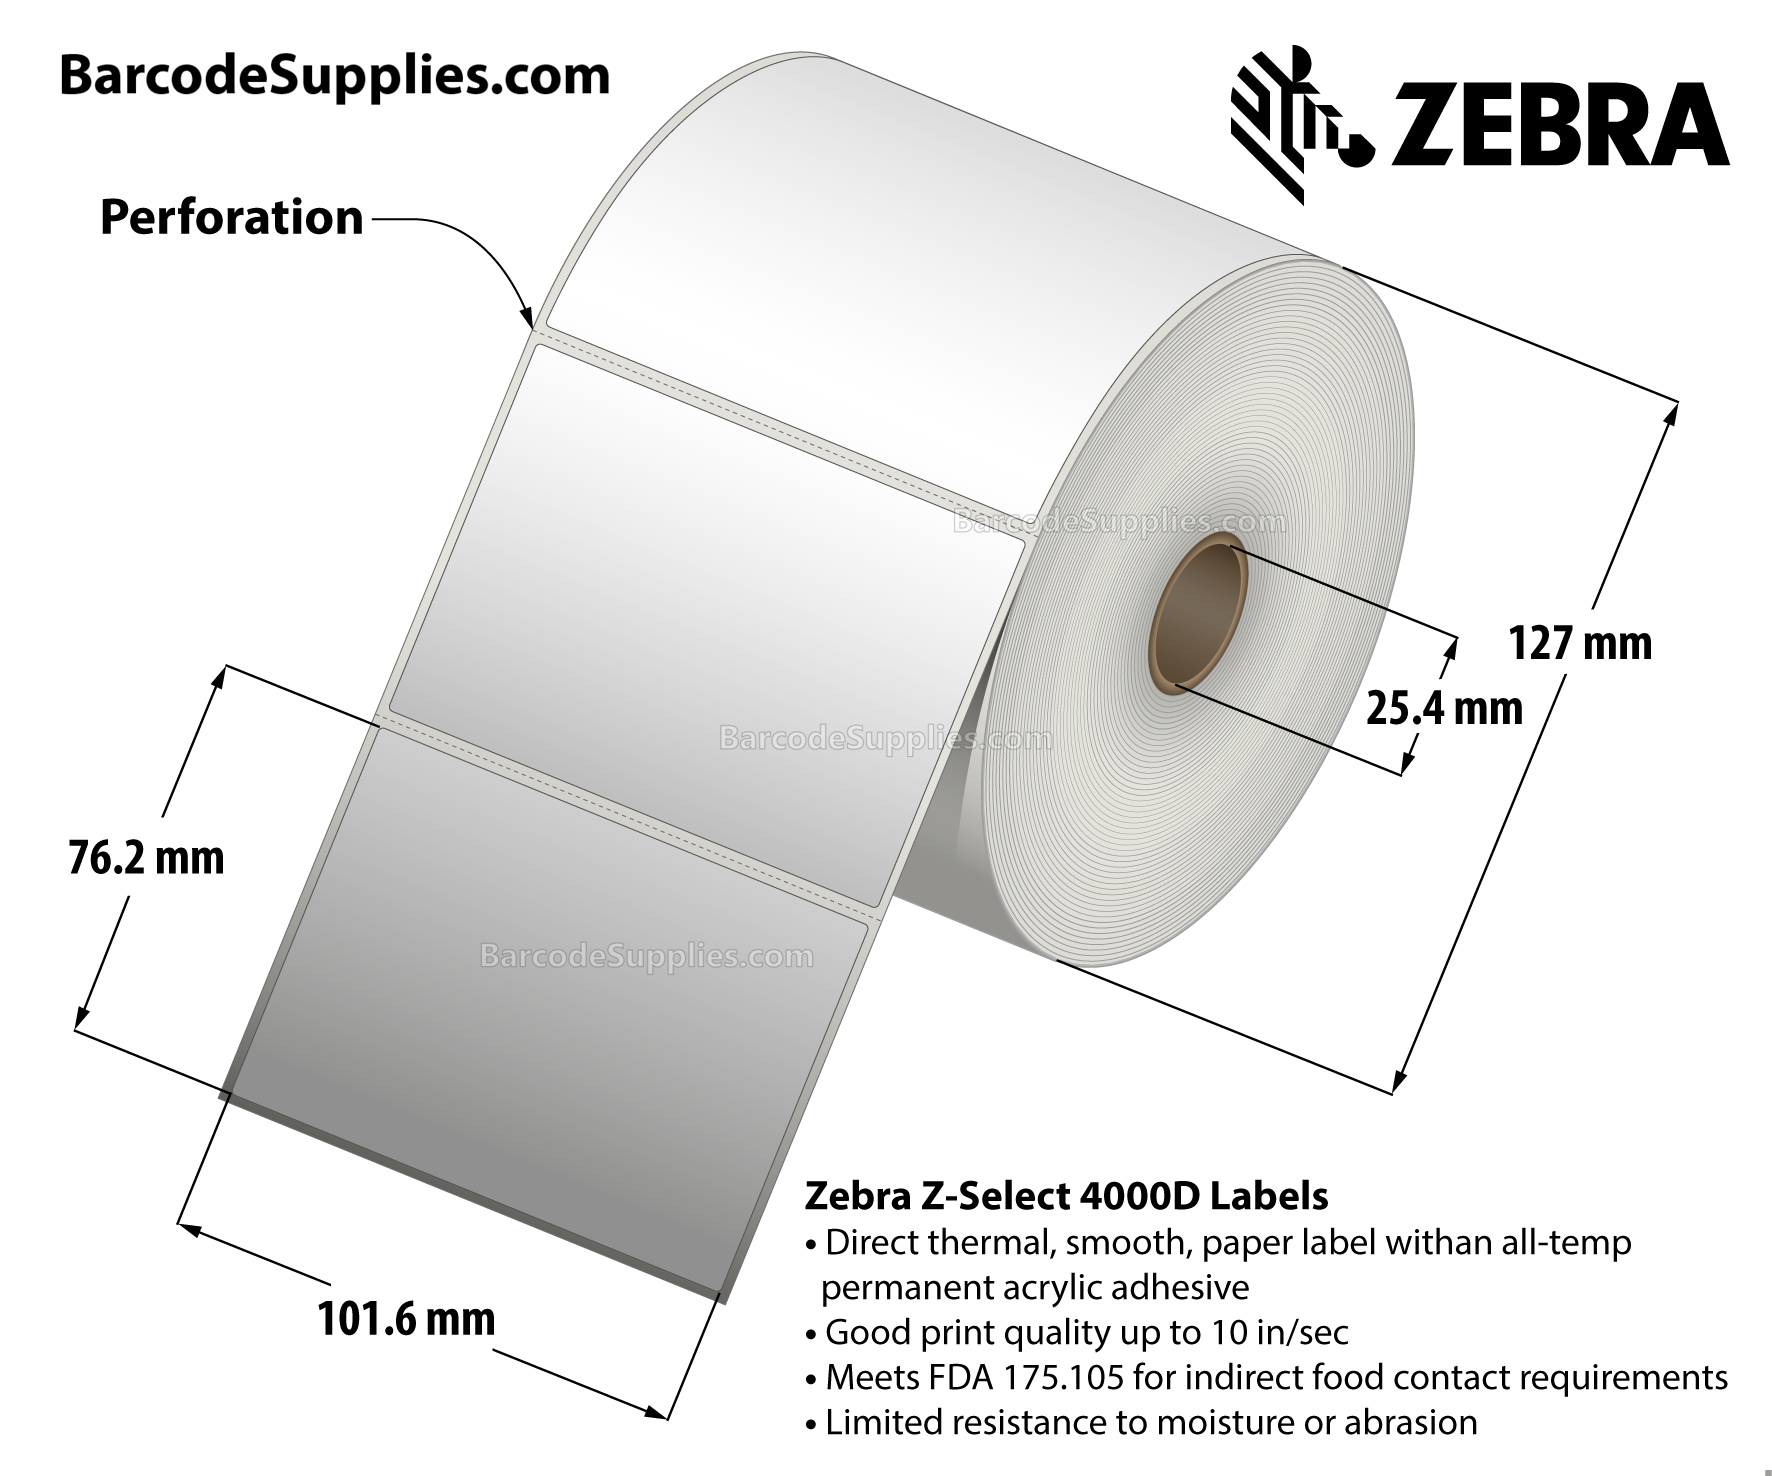 4 x 3 Direct Thermal White Z-Select 4000D Labels With All-Temp Adhesive - Perforated - 930 Labels Per Roll - Carton Of 12 Rolls - 11160 Labels Total - MPN: 10015344